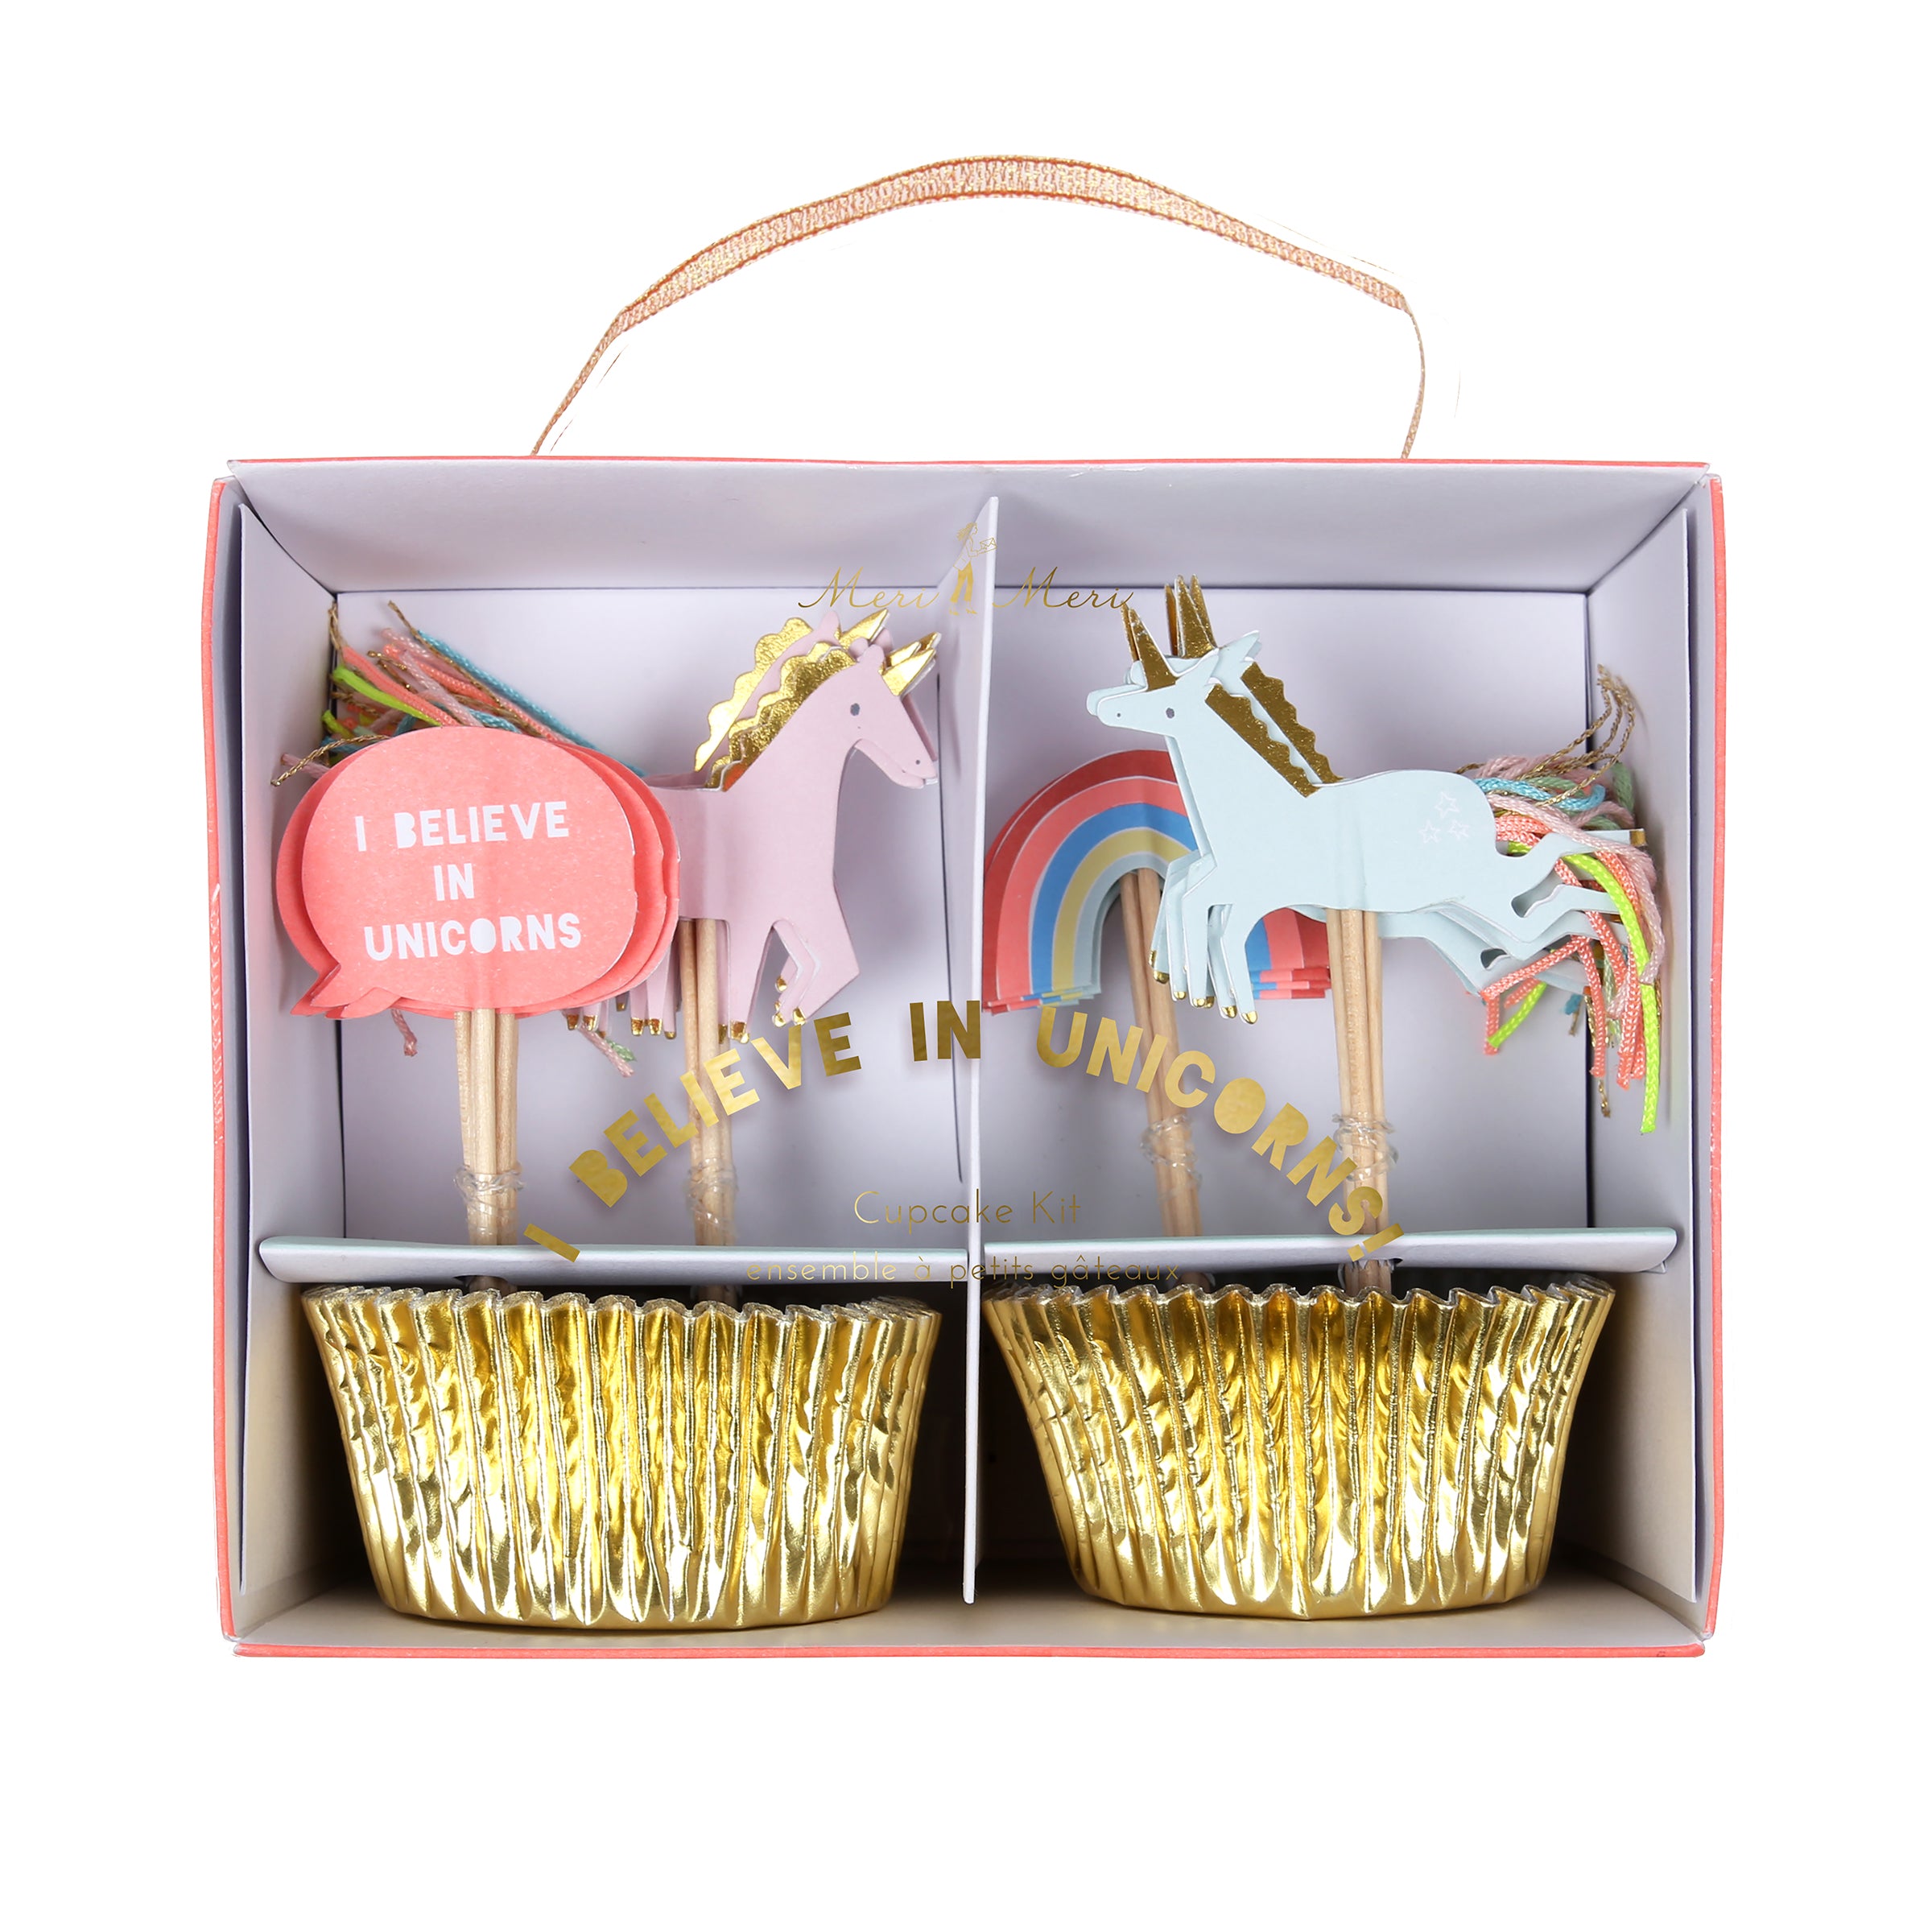 The kit includes shiny gold cupcake cases and rainbow and unicorn toppers, beautifully embellished with thread and gold foil.